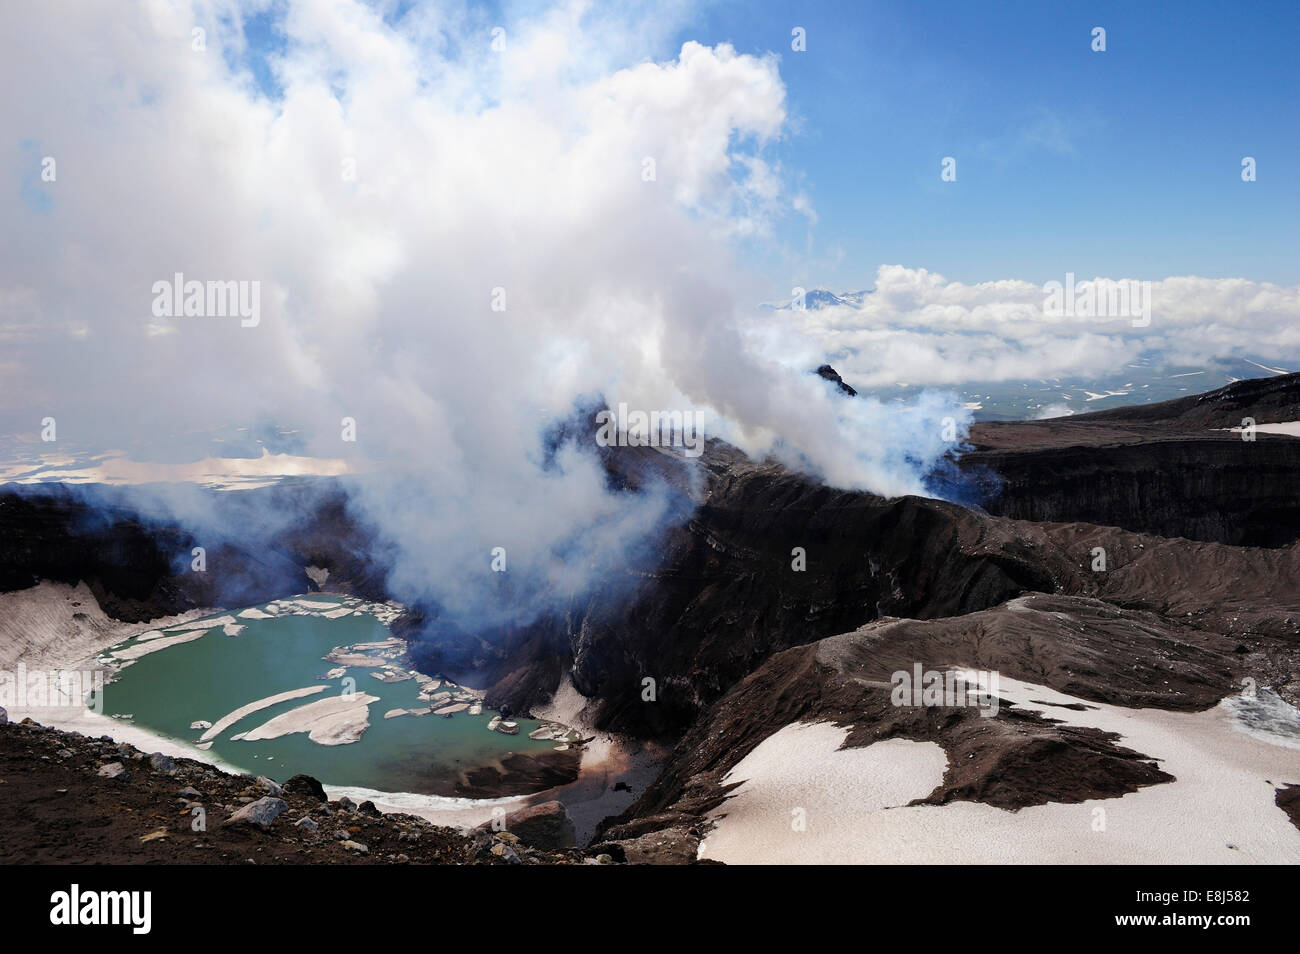 Volcanic crater with crater lake and a hot water vapour cloud, Gorely volcano, Kamchatka Peninsula, Russia Stock Photo